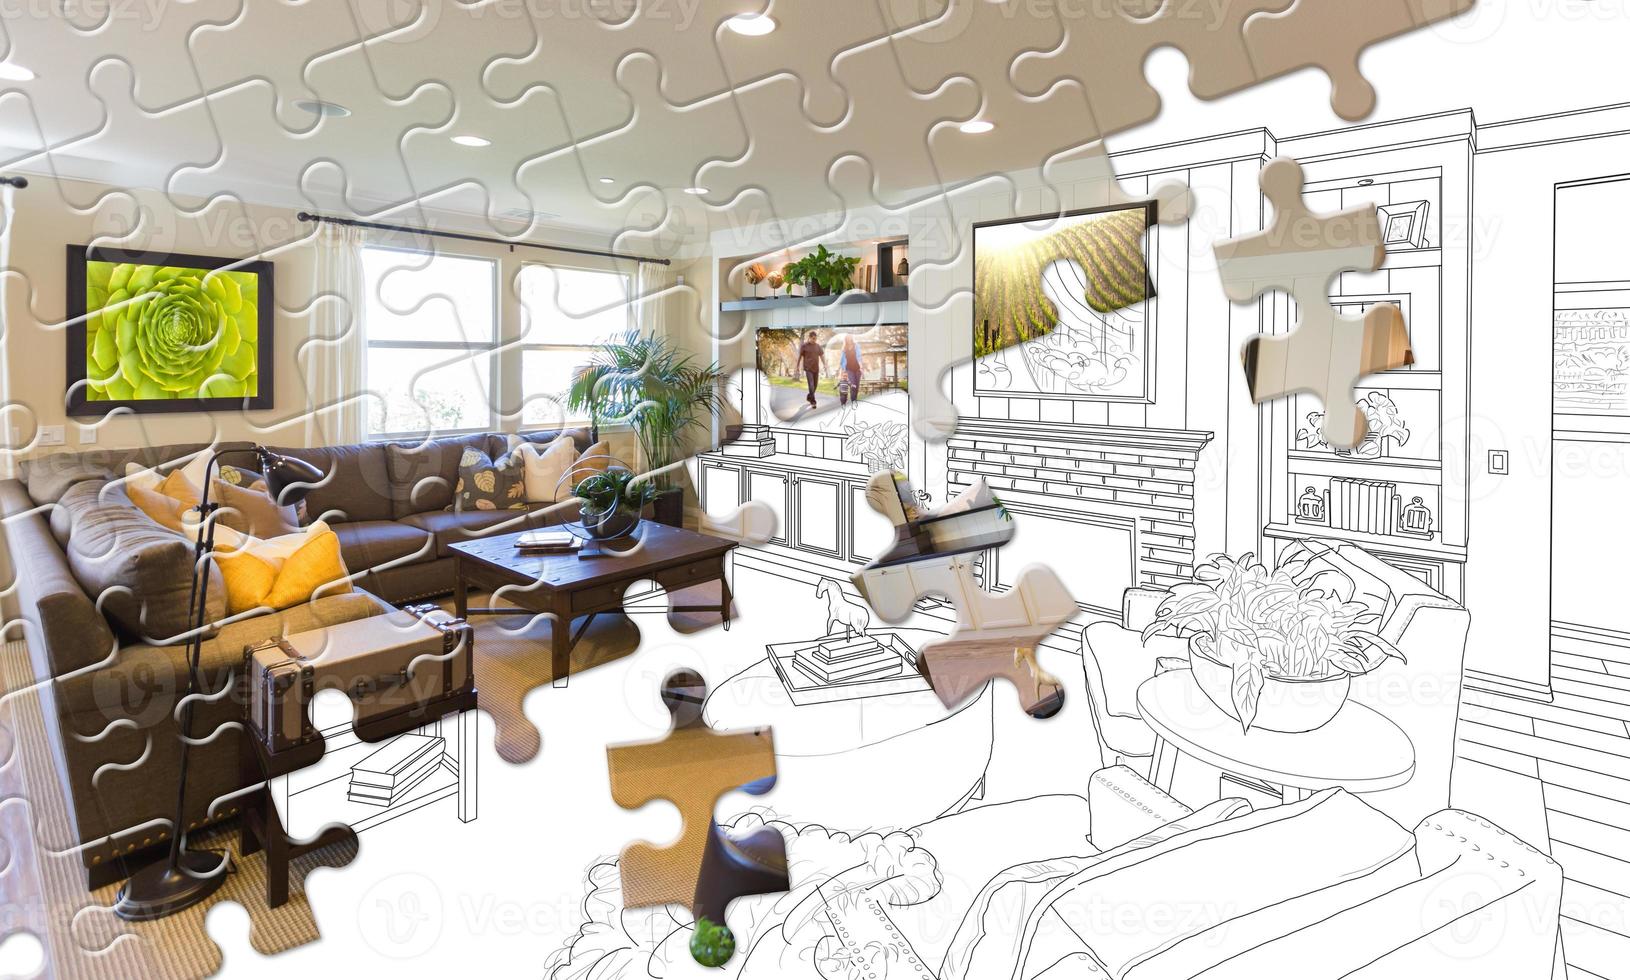 Puzzle Pieces Fitting Together Revealing Finished Living Room Build Over Drawing photo